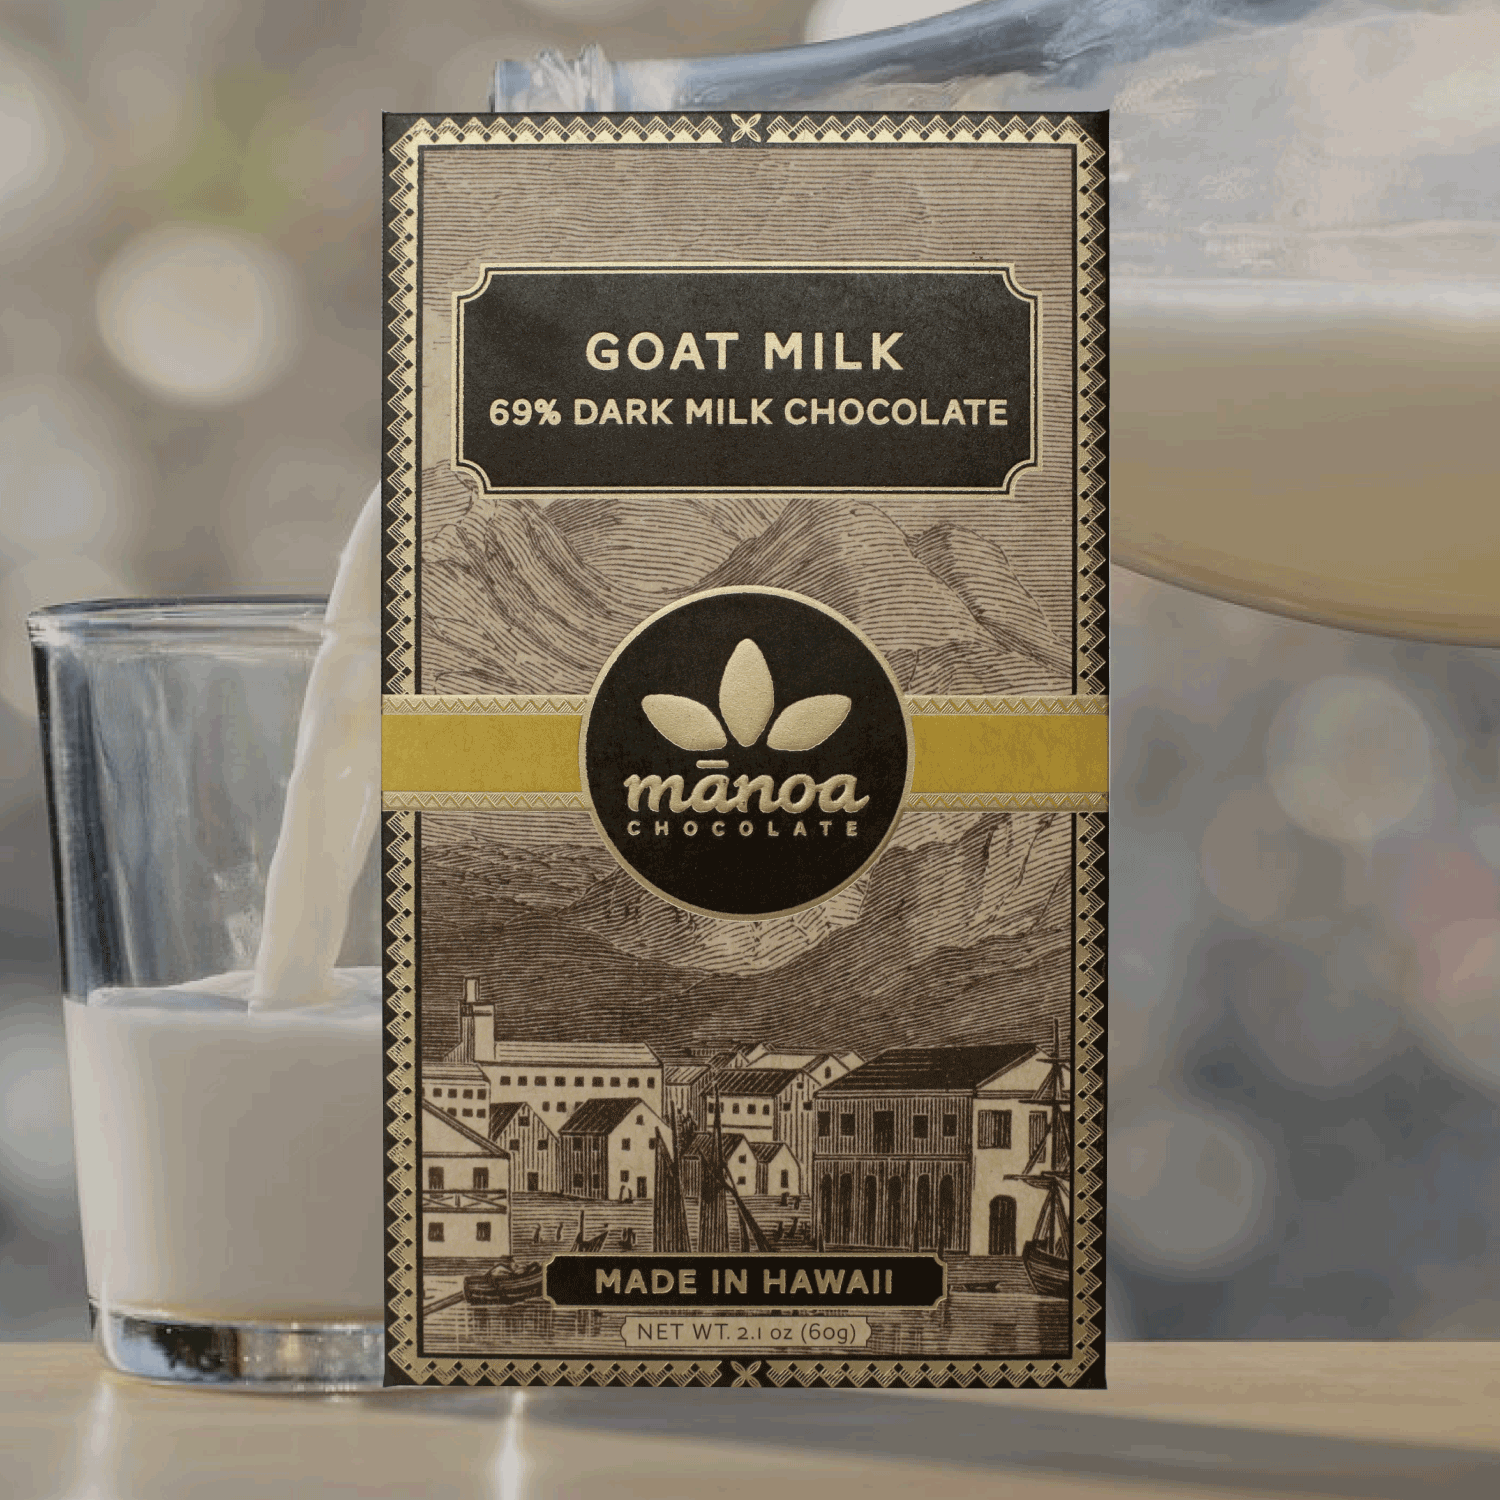 Image of Goat milk chocolate bar, in brown, natural-looking packaging, with a glass of milk